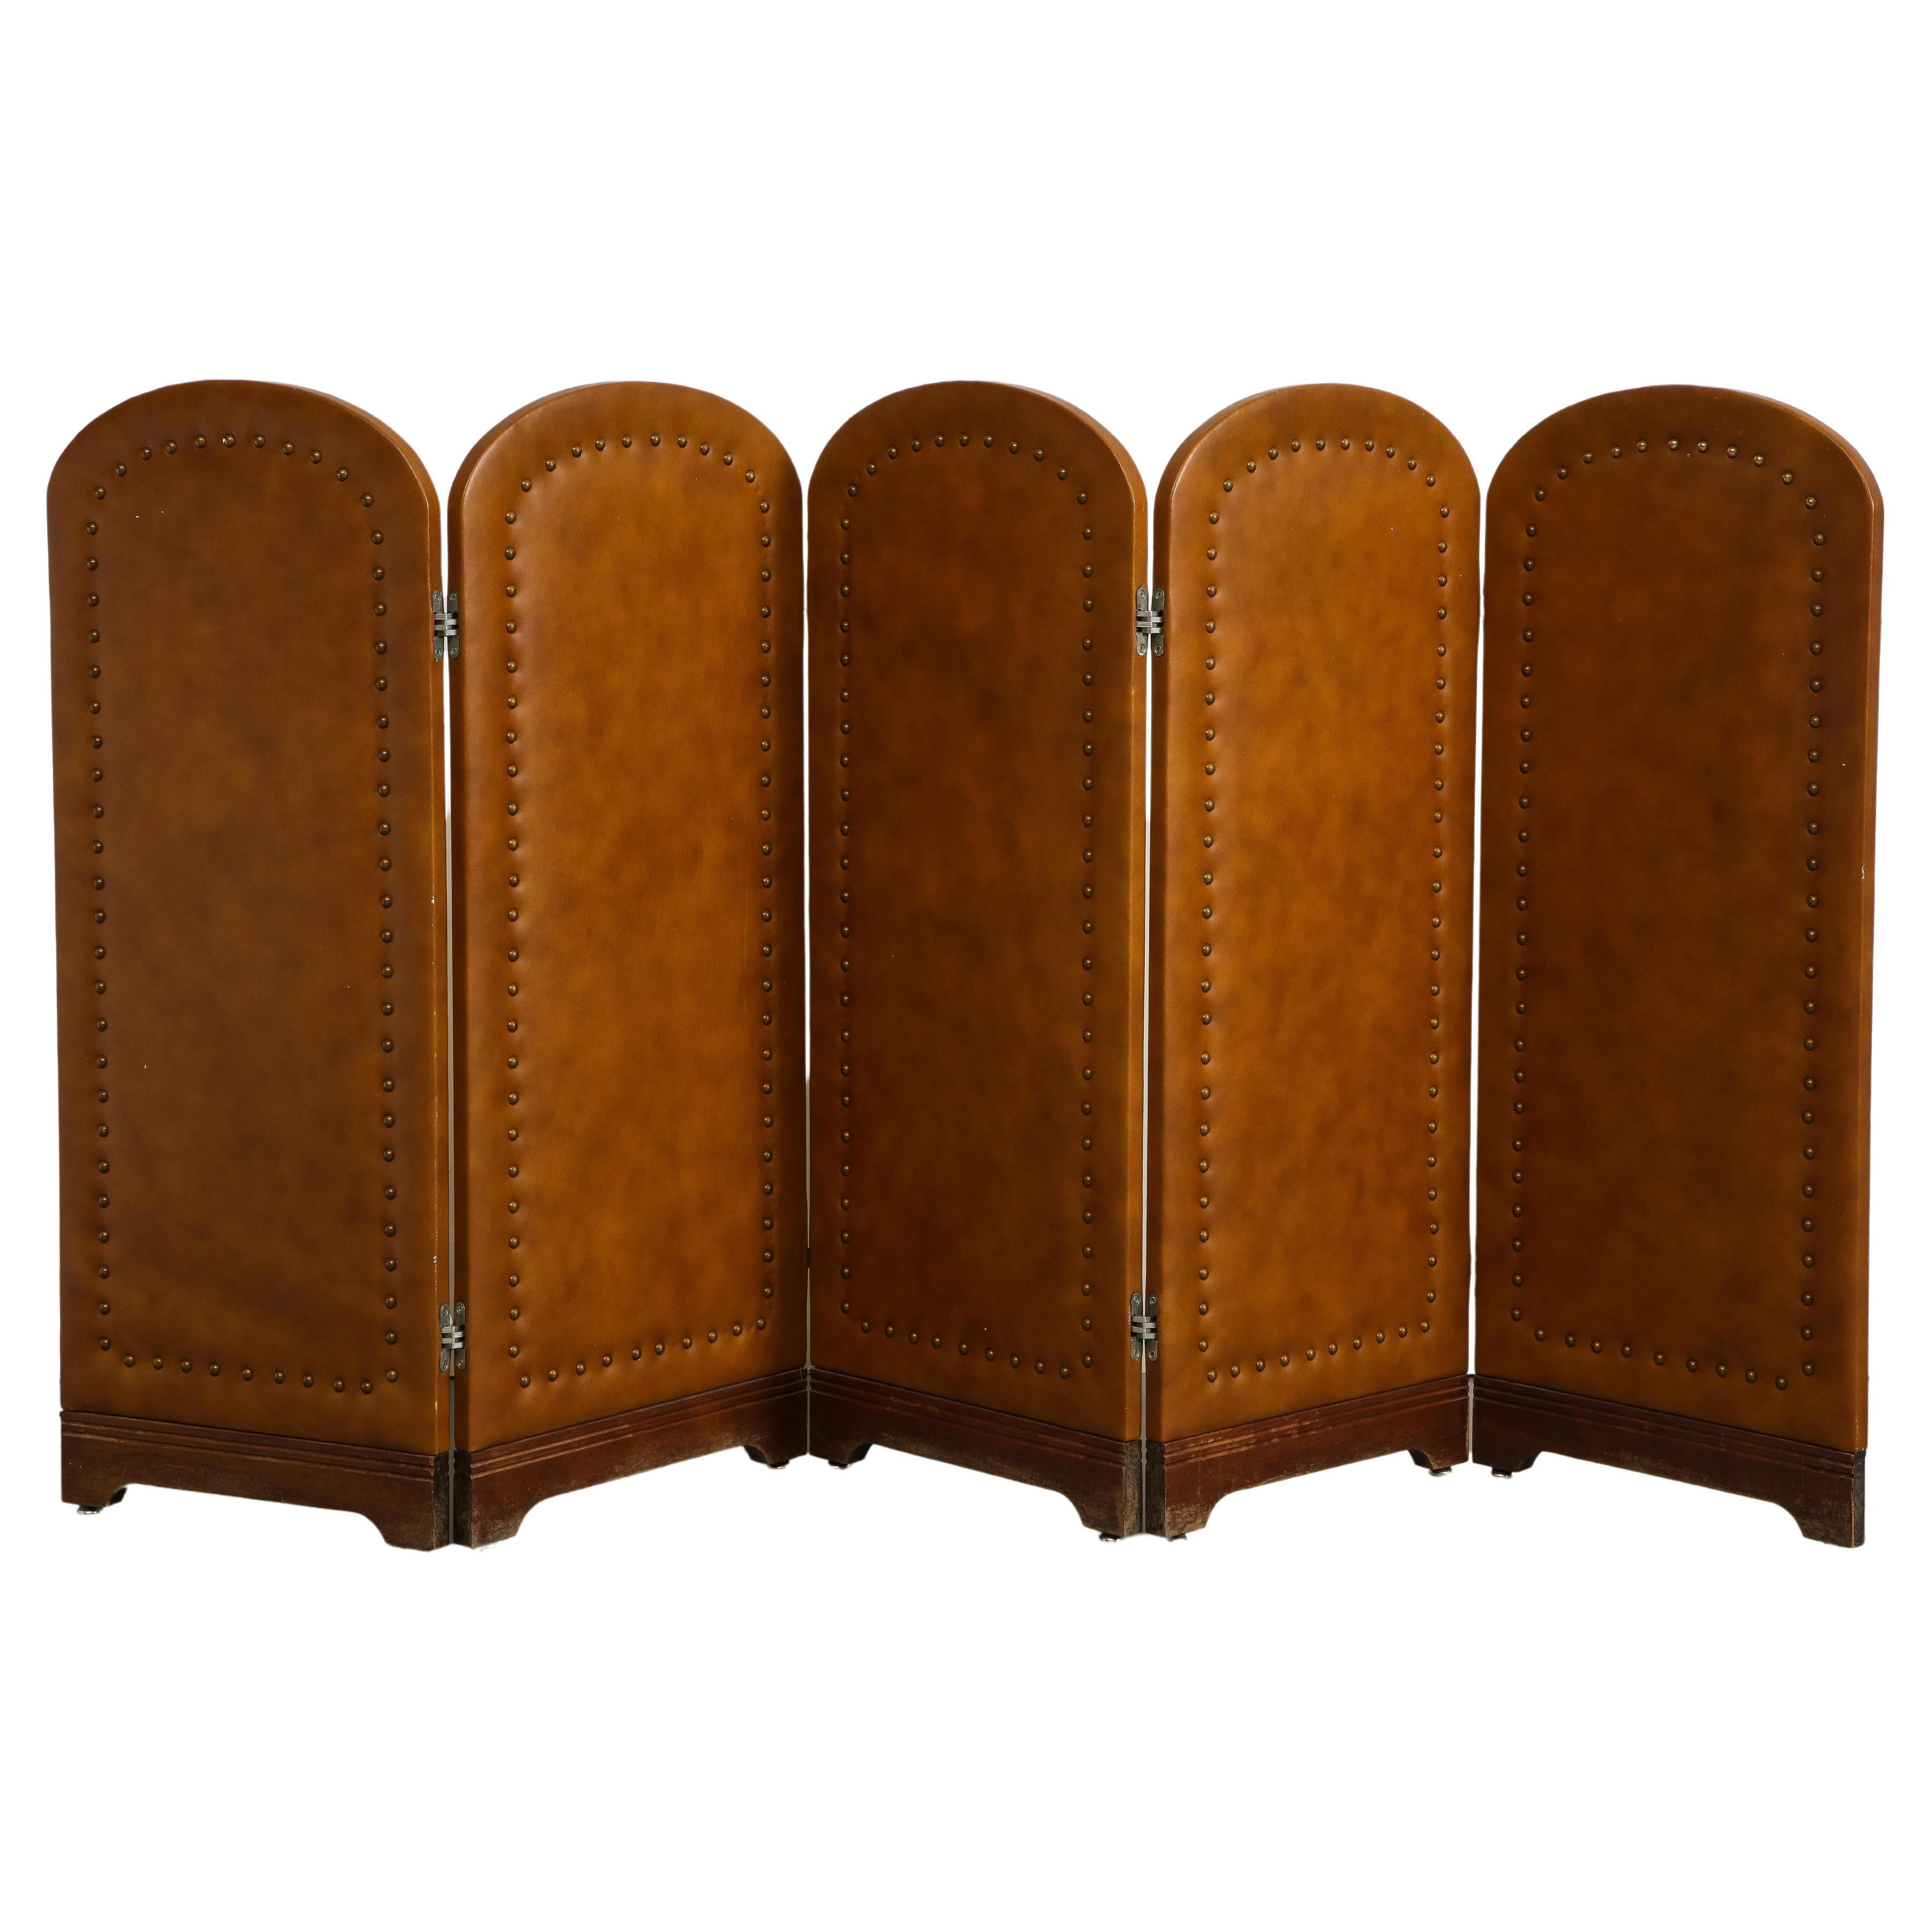 Vintage Leather Folding Screen with 5 Panels, C. 1960 For Sale